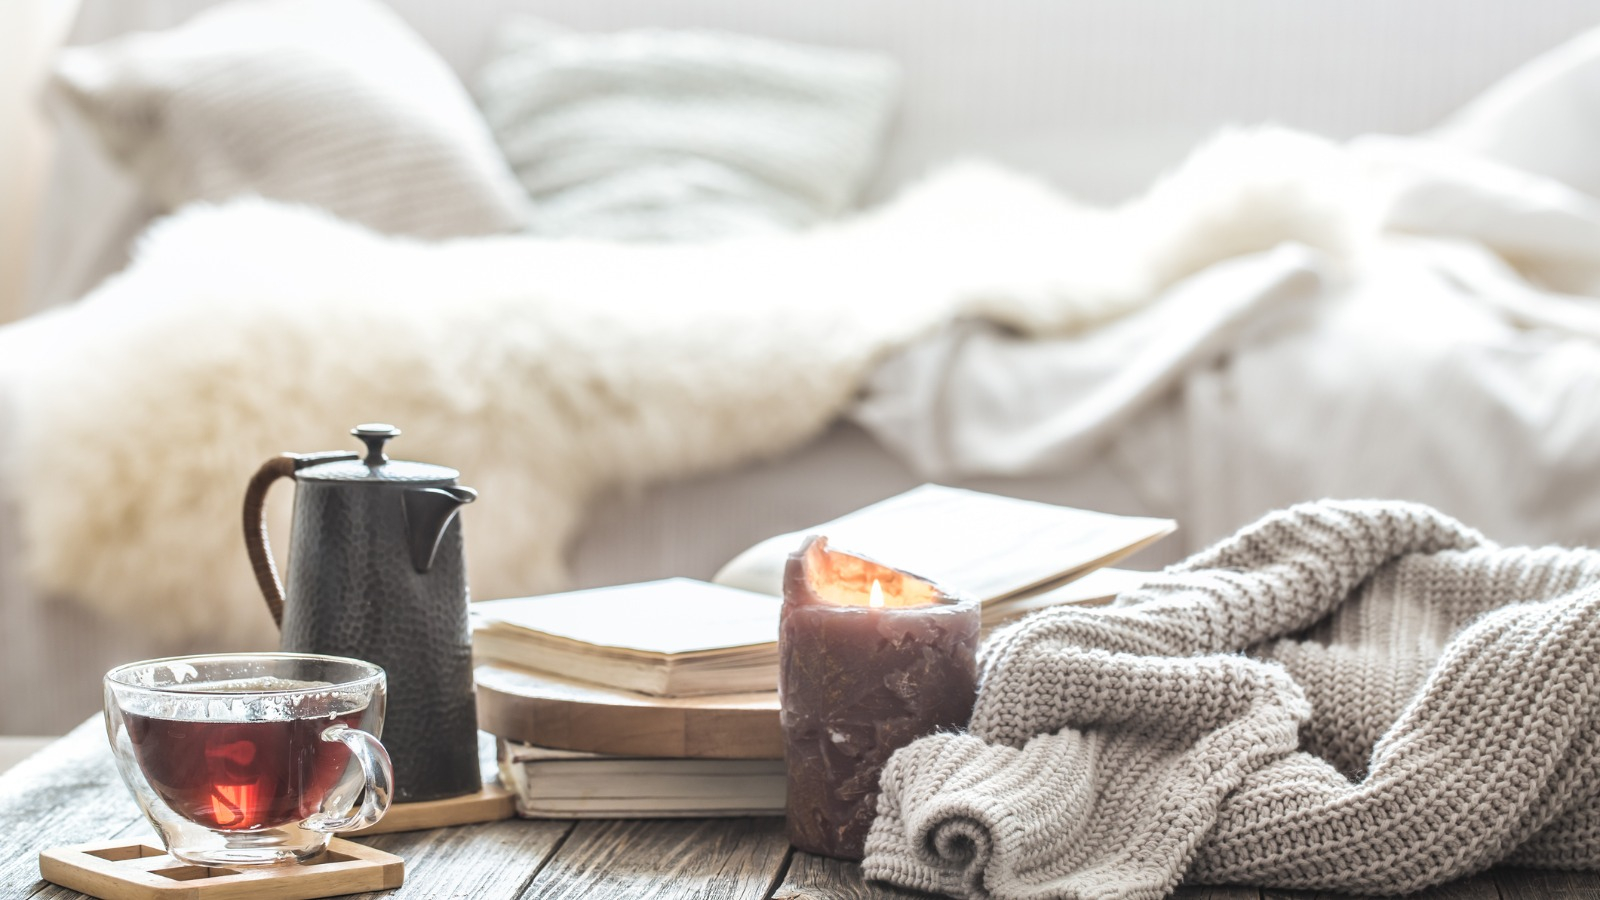 Get Cozy For Fall at Home With These Products